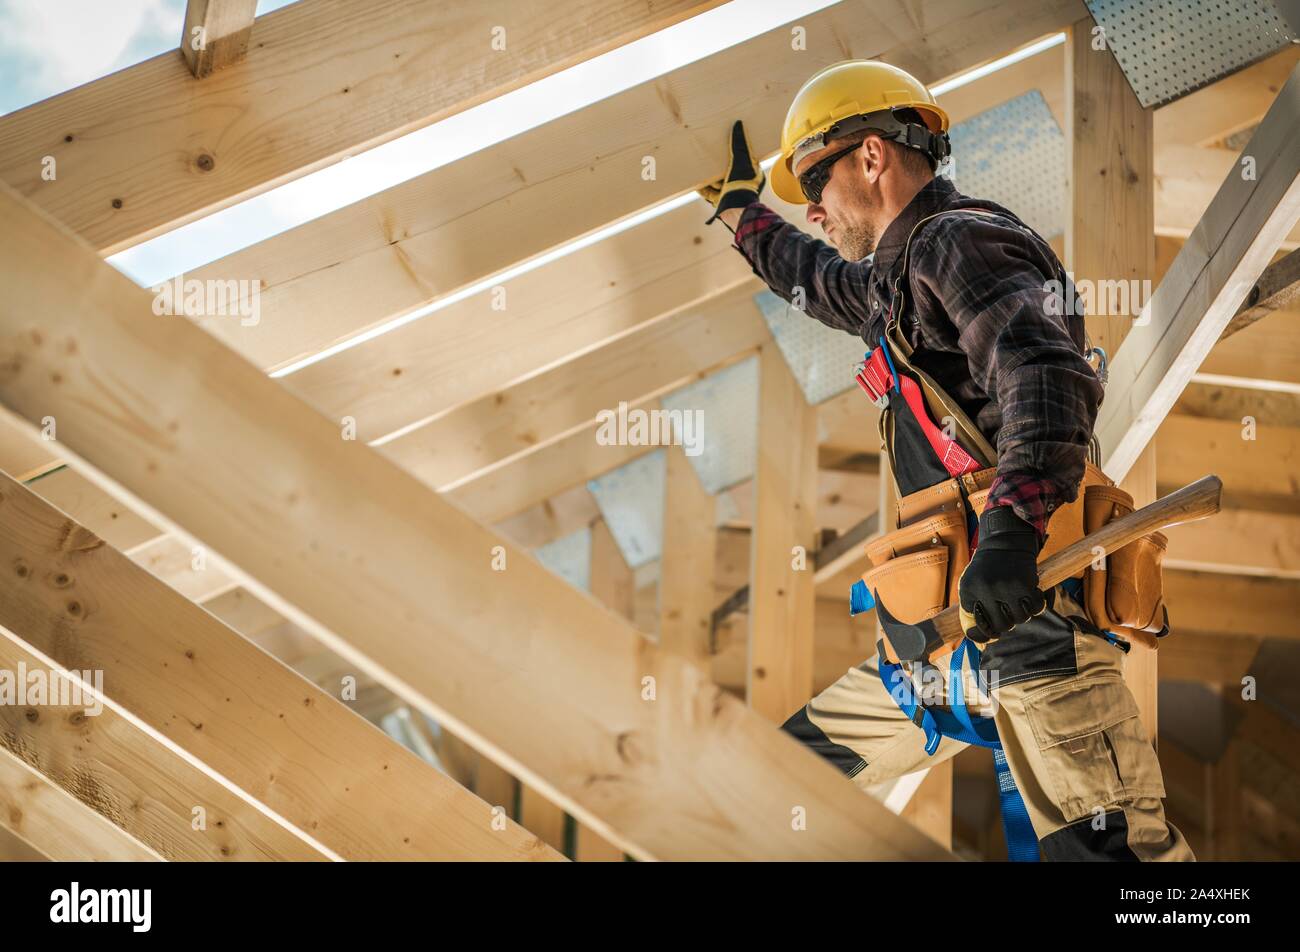 Construction Worker on Duty. Caucasian Contractor and the Wooden House Frame. Industrial Theme. Stock Photo